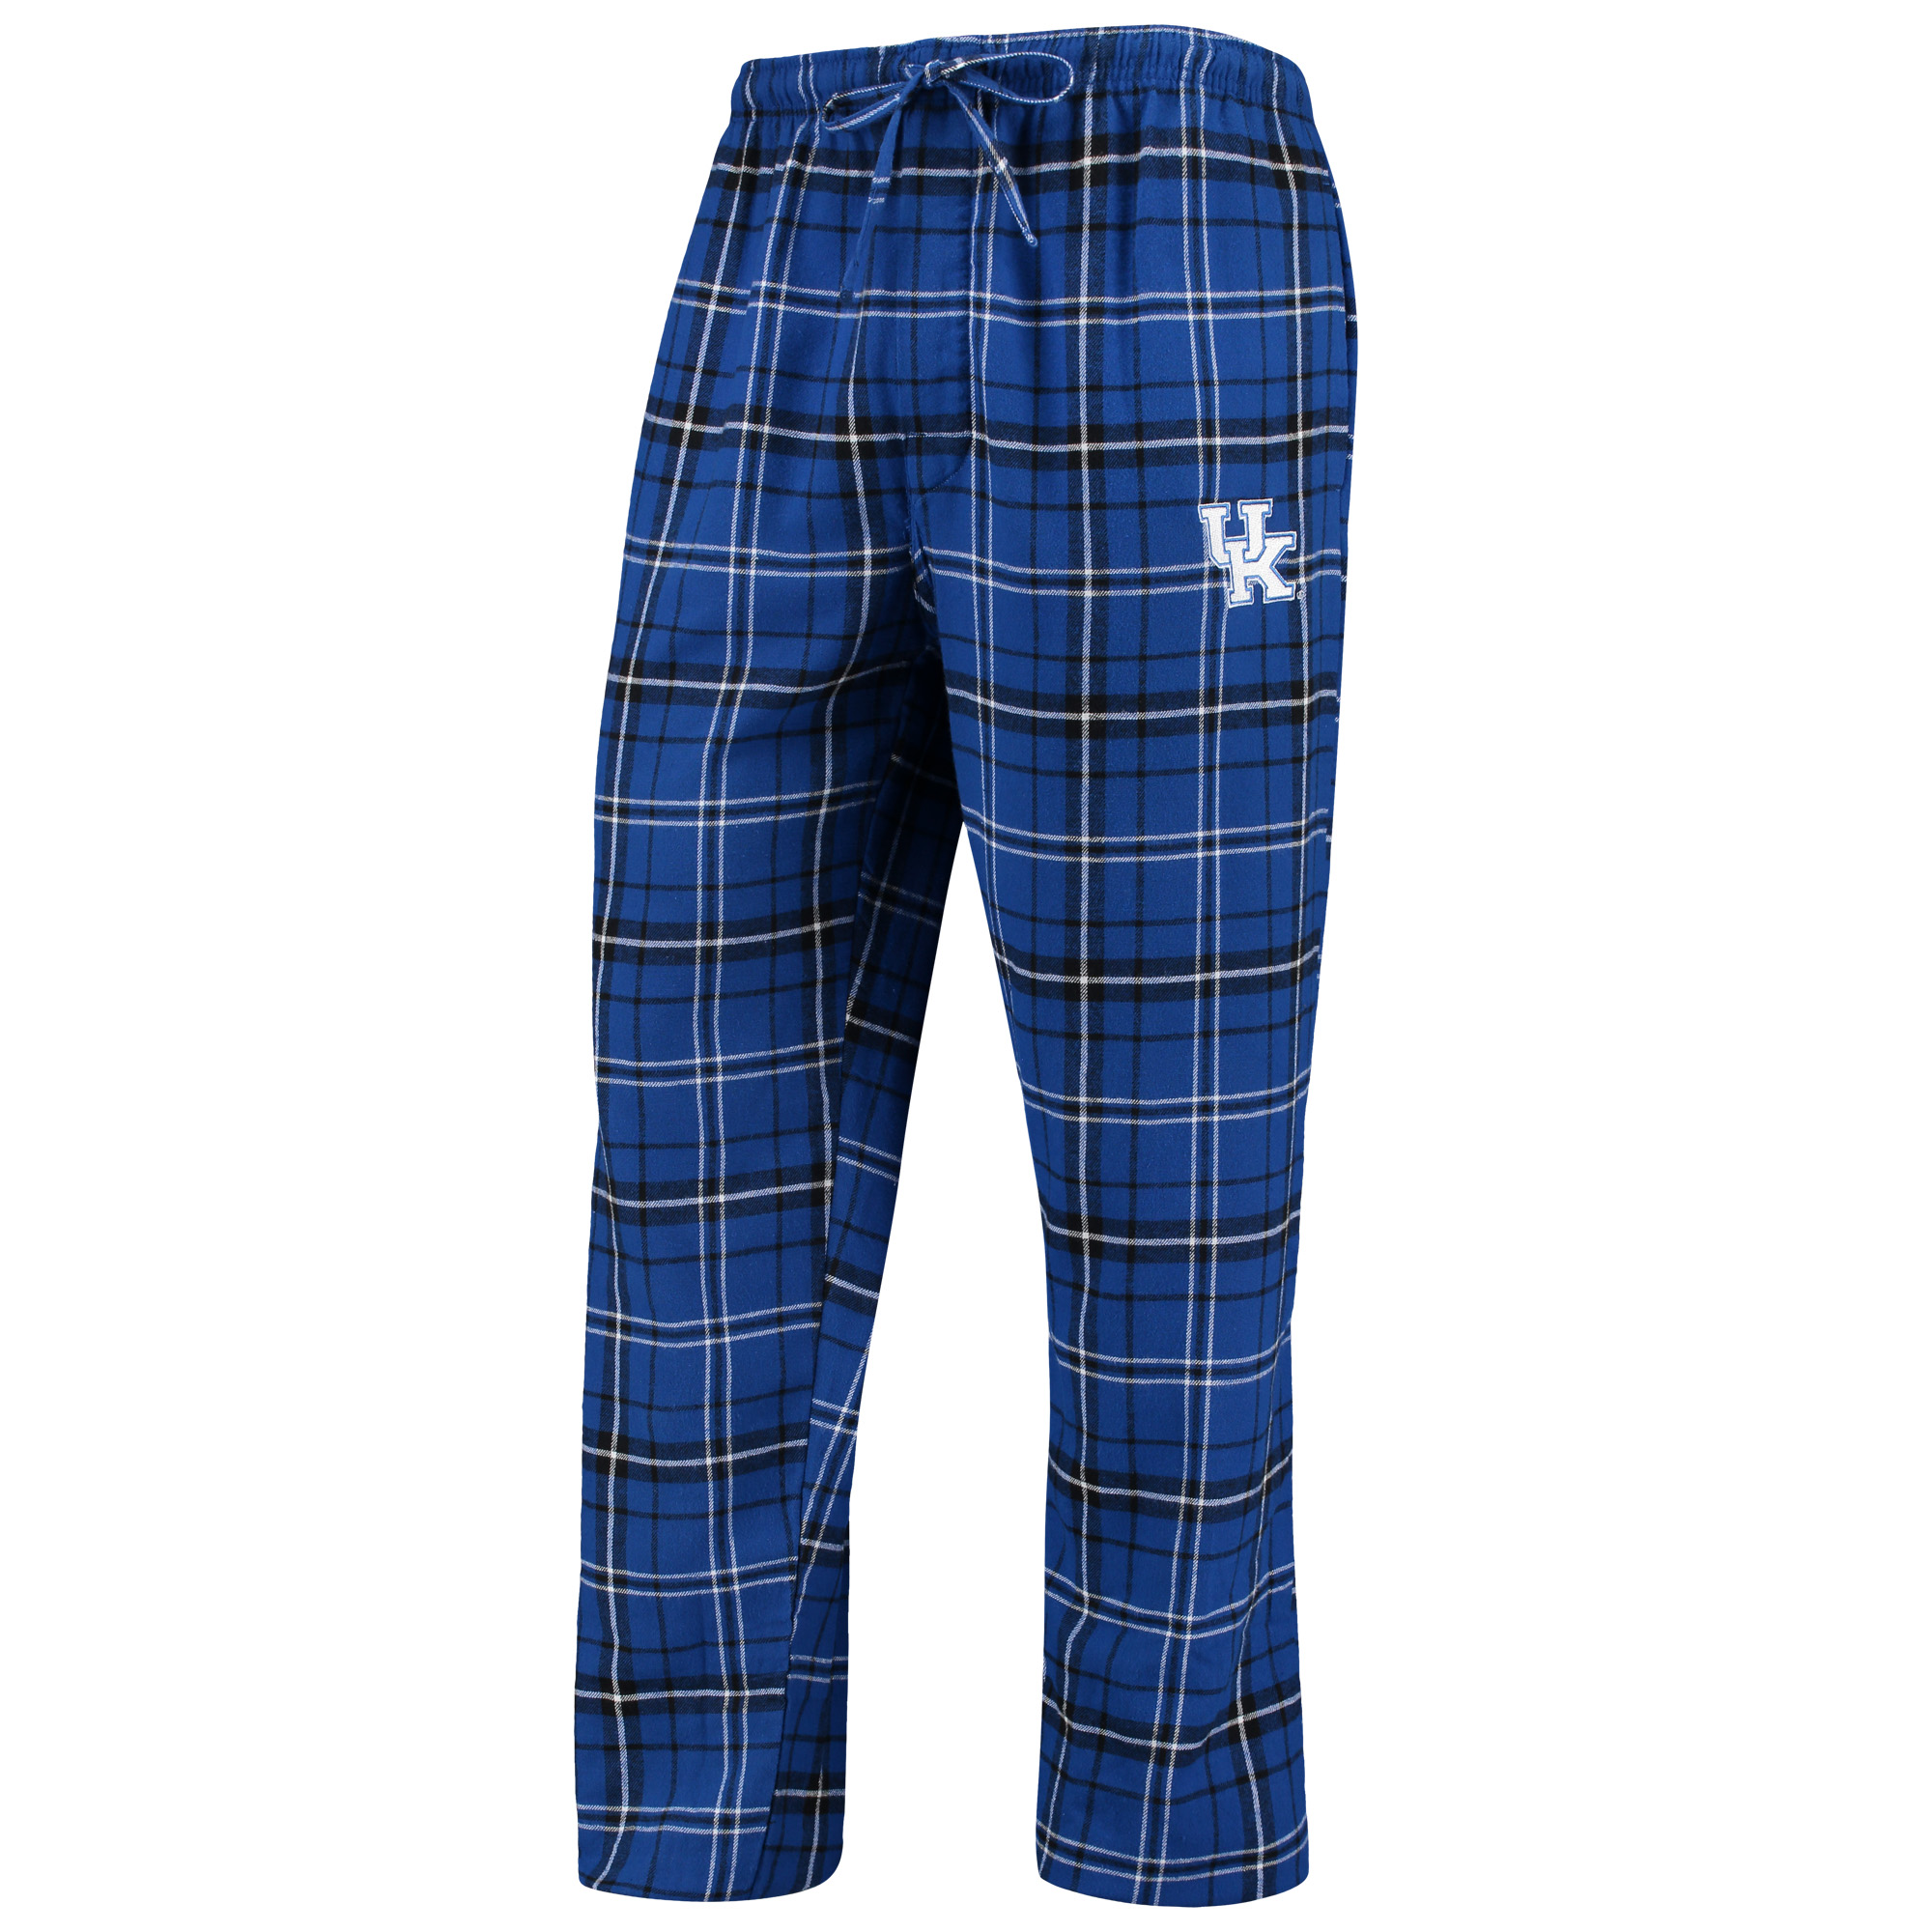 Men's Concepts Sport Royal/Black Kentucky Wildcats Ultimate Flannel Pants - image 2 of 3